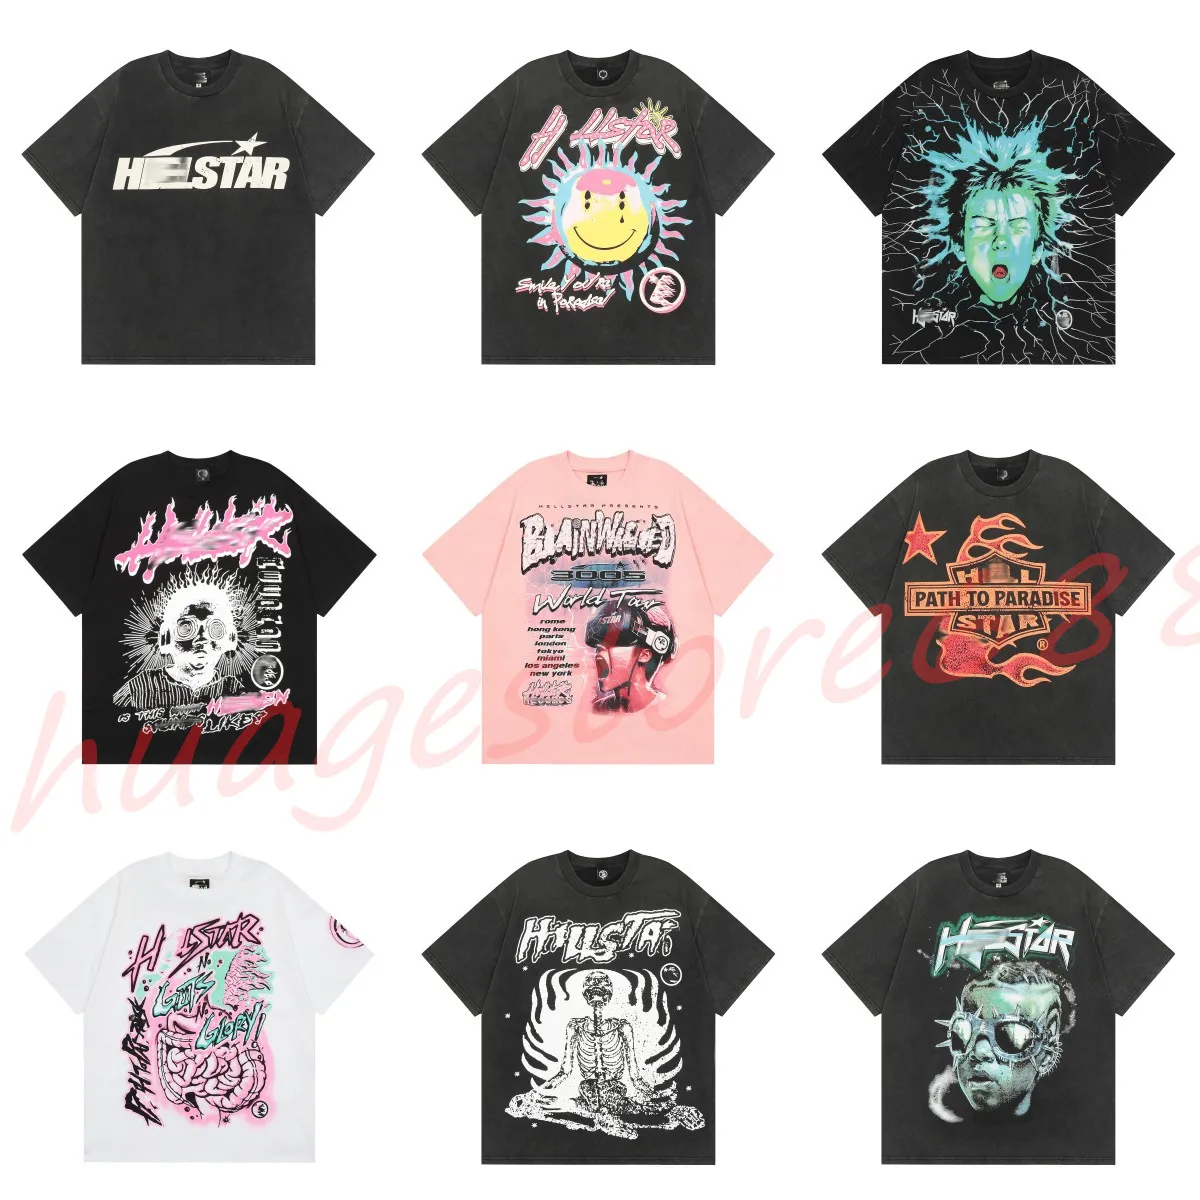 Hellstar T-shirt Rappe Hommes Femmes Tshirt Rappeur Lavage Gris Heavy Craft Unisexe Manches Courtes Top High Street Mode Rétro Hell Femmes T-shirt Designers Tees Taille S-XL i9